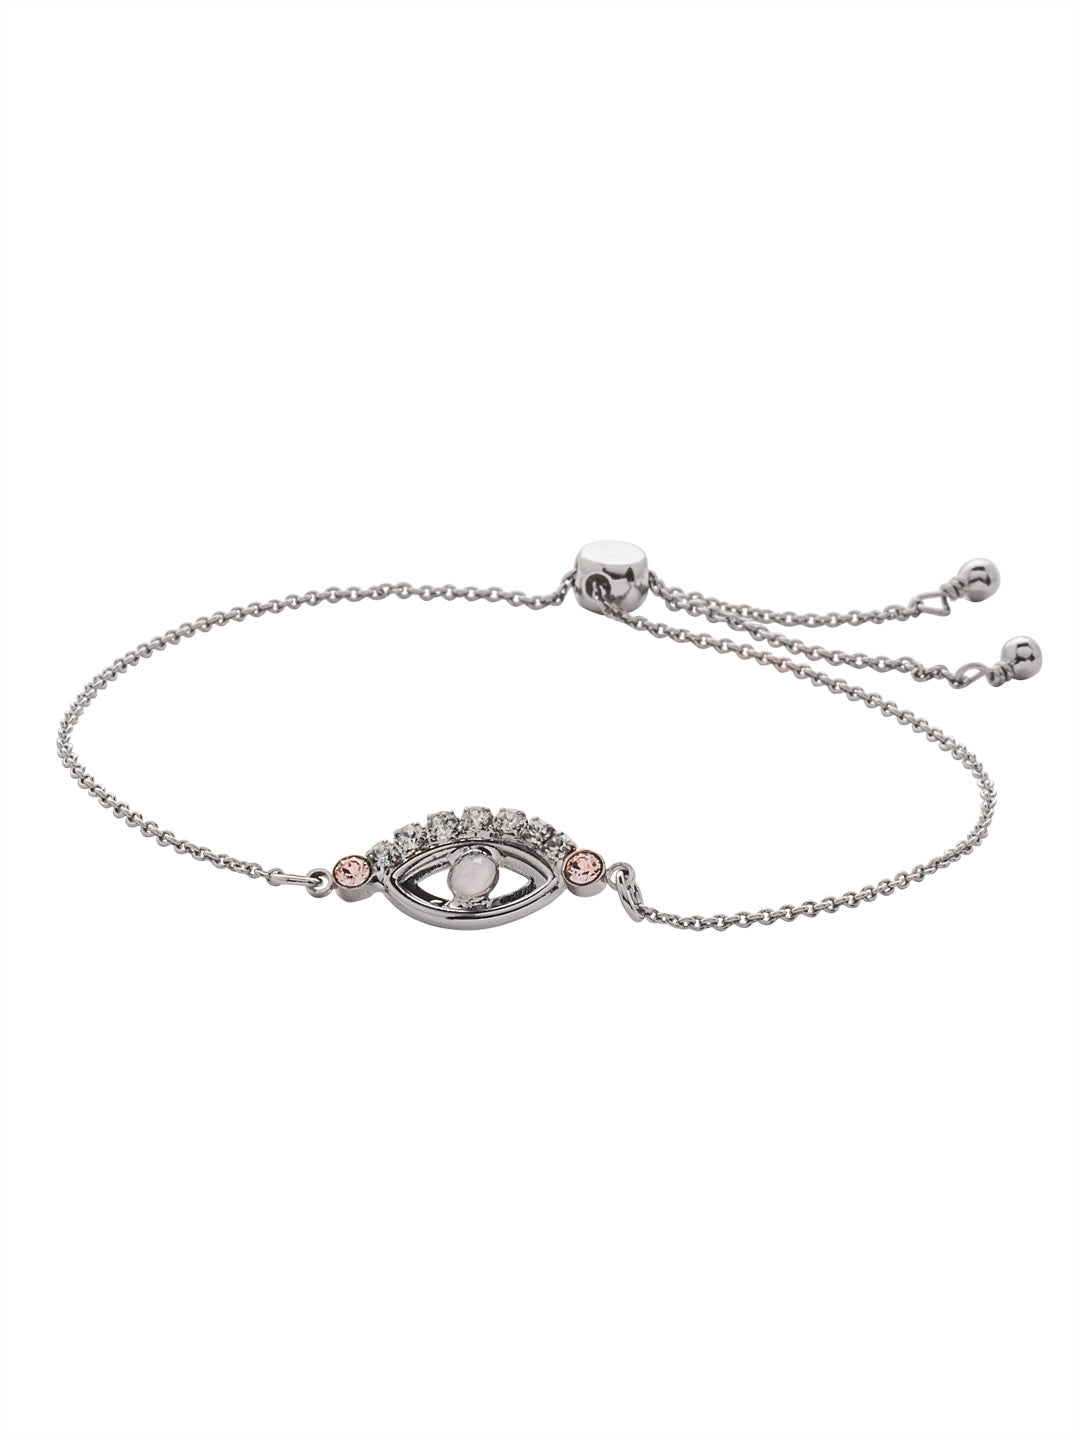 Mini Evil Eye Slider Bracelet - BEV6PDSNB - <p>Feeling a bit edgy? Slip on the Mini Evil Eye Slider Bracelet and show off this protective amulet, studded in sparkling crystals. From Sorrelli's Snow Bunny collection in our Palladium finish.</p>